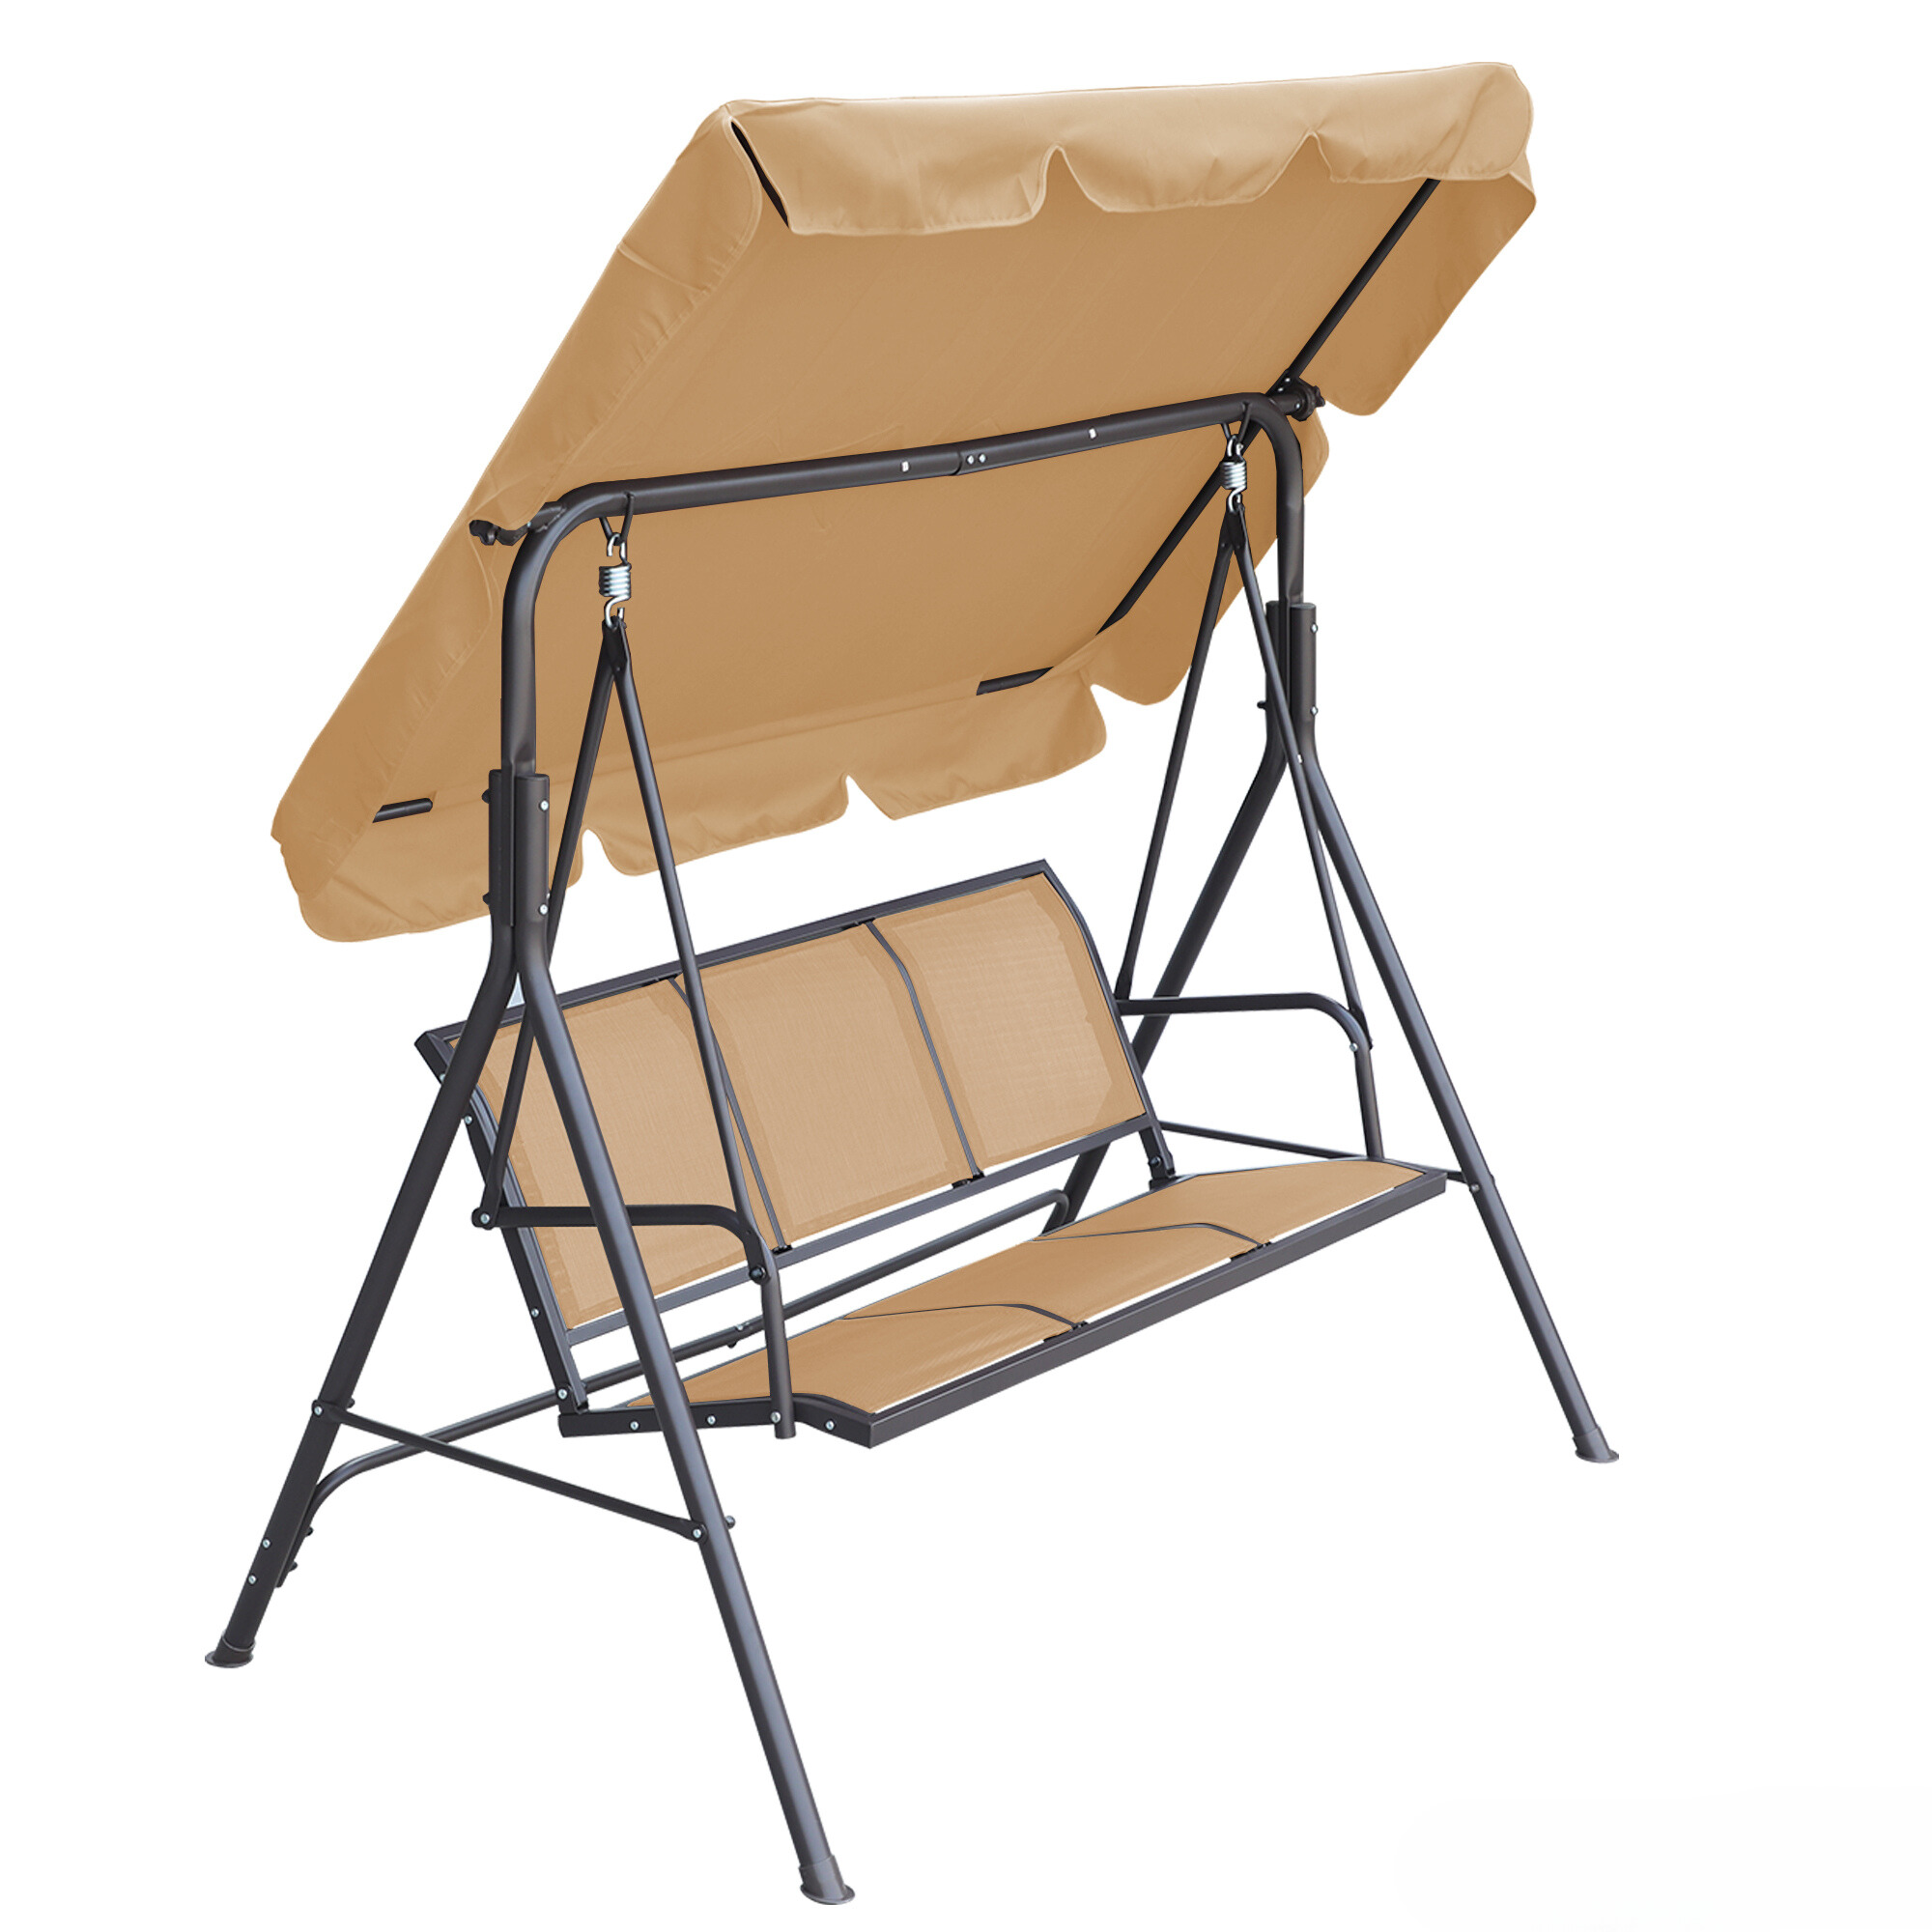 Steel Frame Textilence 3 Seats Patio Swing Chair Swing Glider with Removable Convertible Canopy